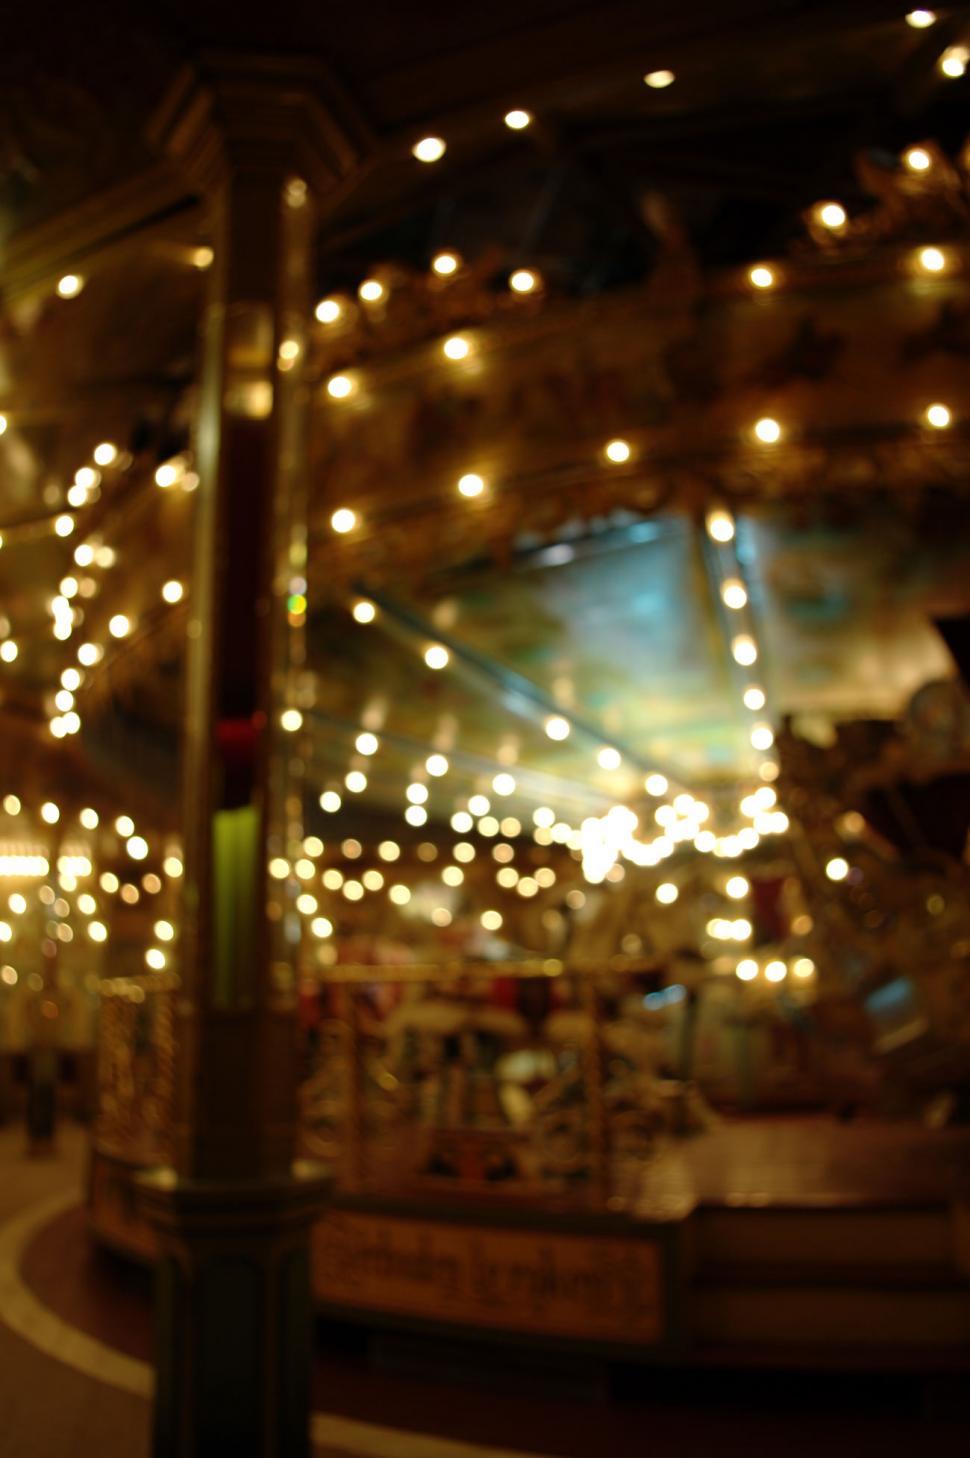 Free Image of Vibrant Carousel Illuminated by Bright Lights 